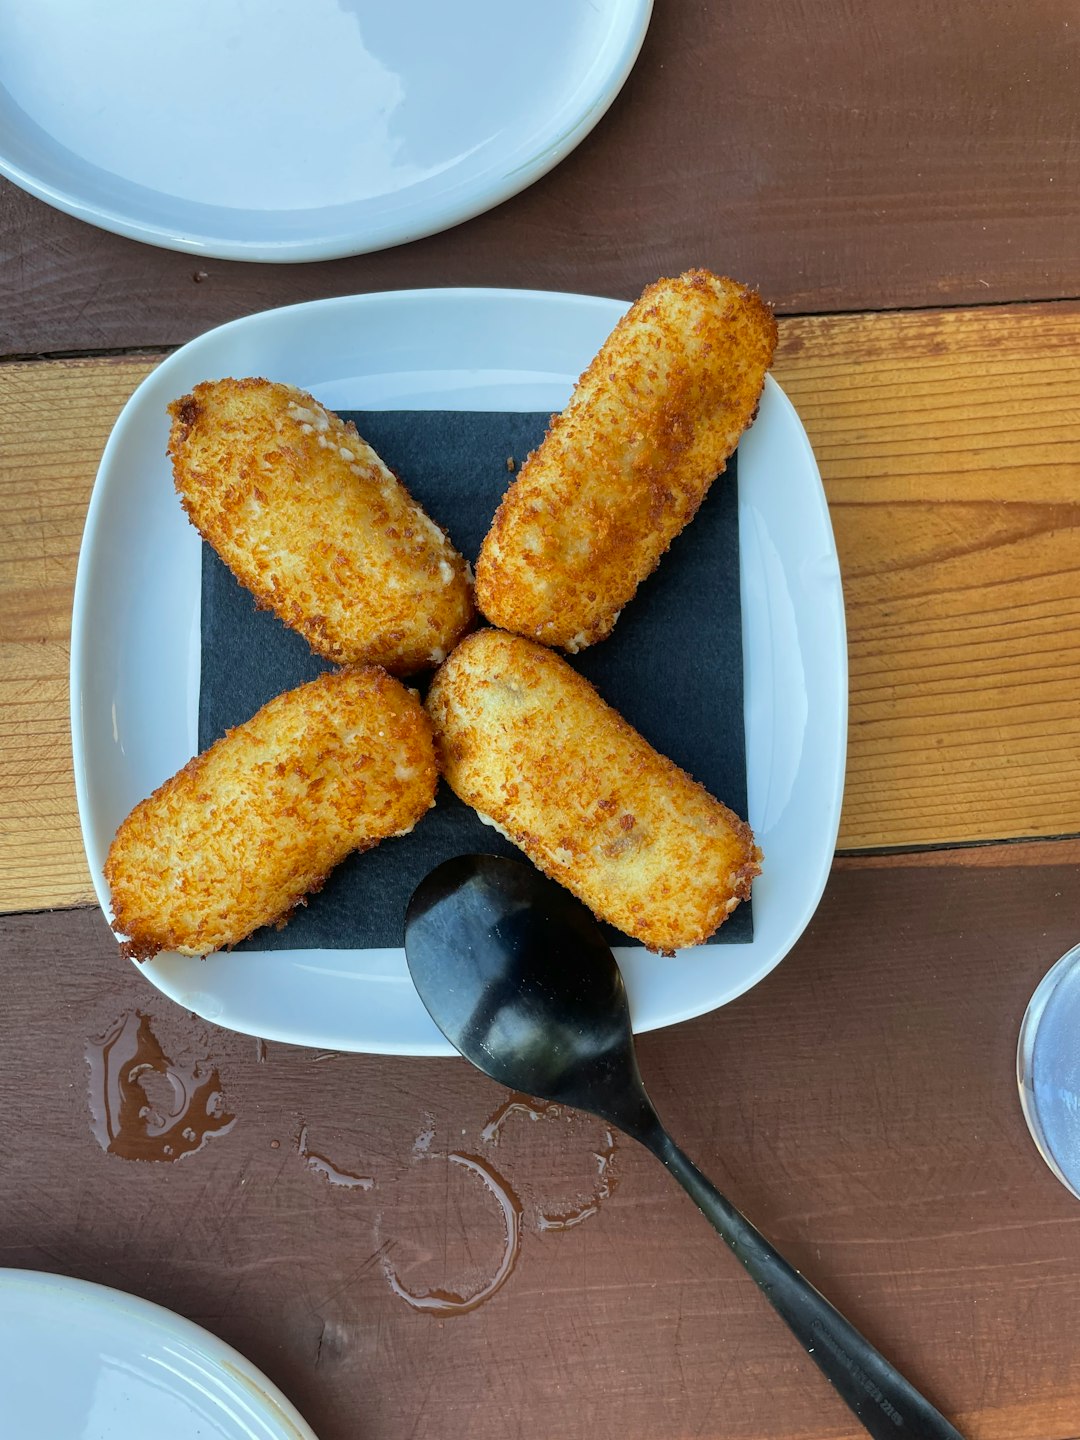 fried food on white ceramic plate